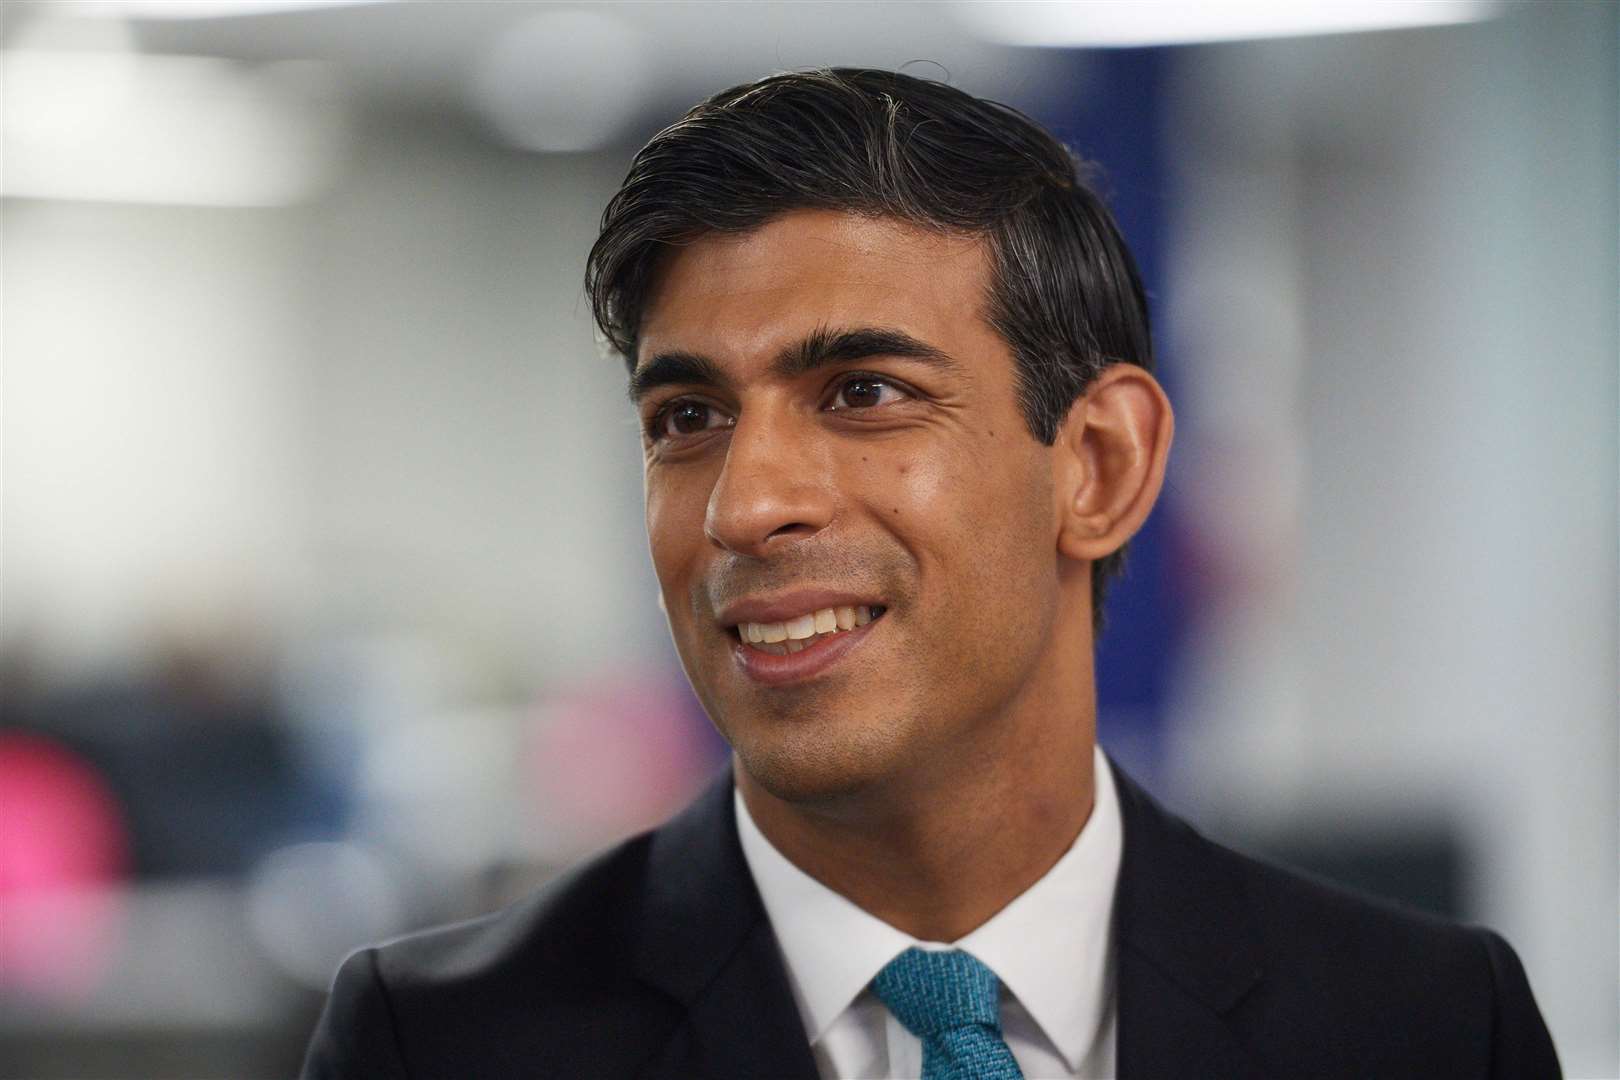 The new leader of the Conservative party Rishi Sunak who will soon be confirmed officially as the Prime Minister.